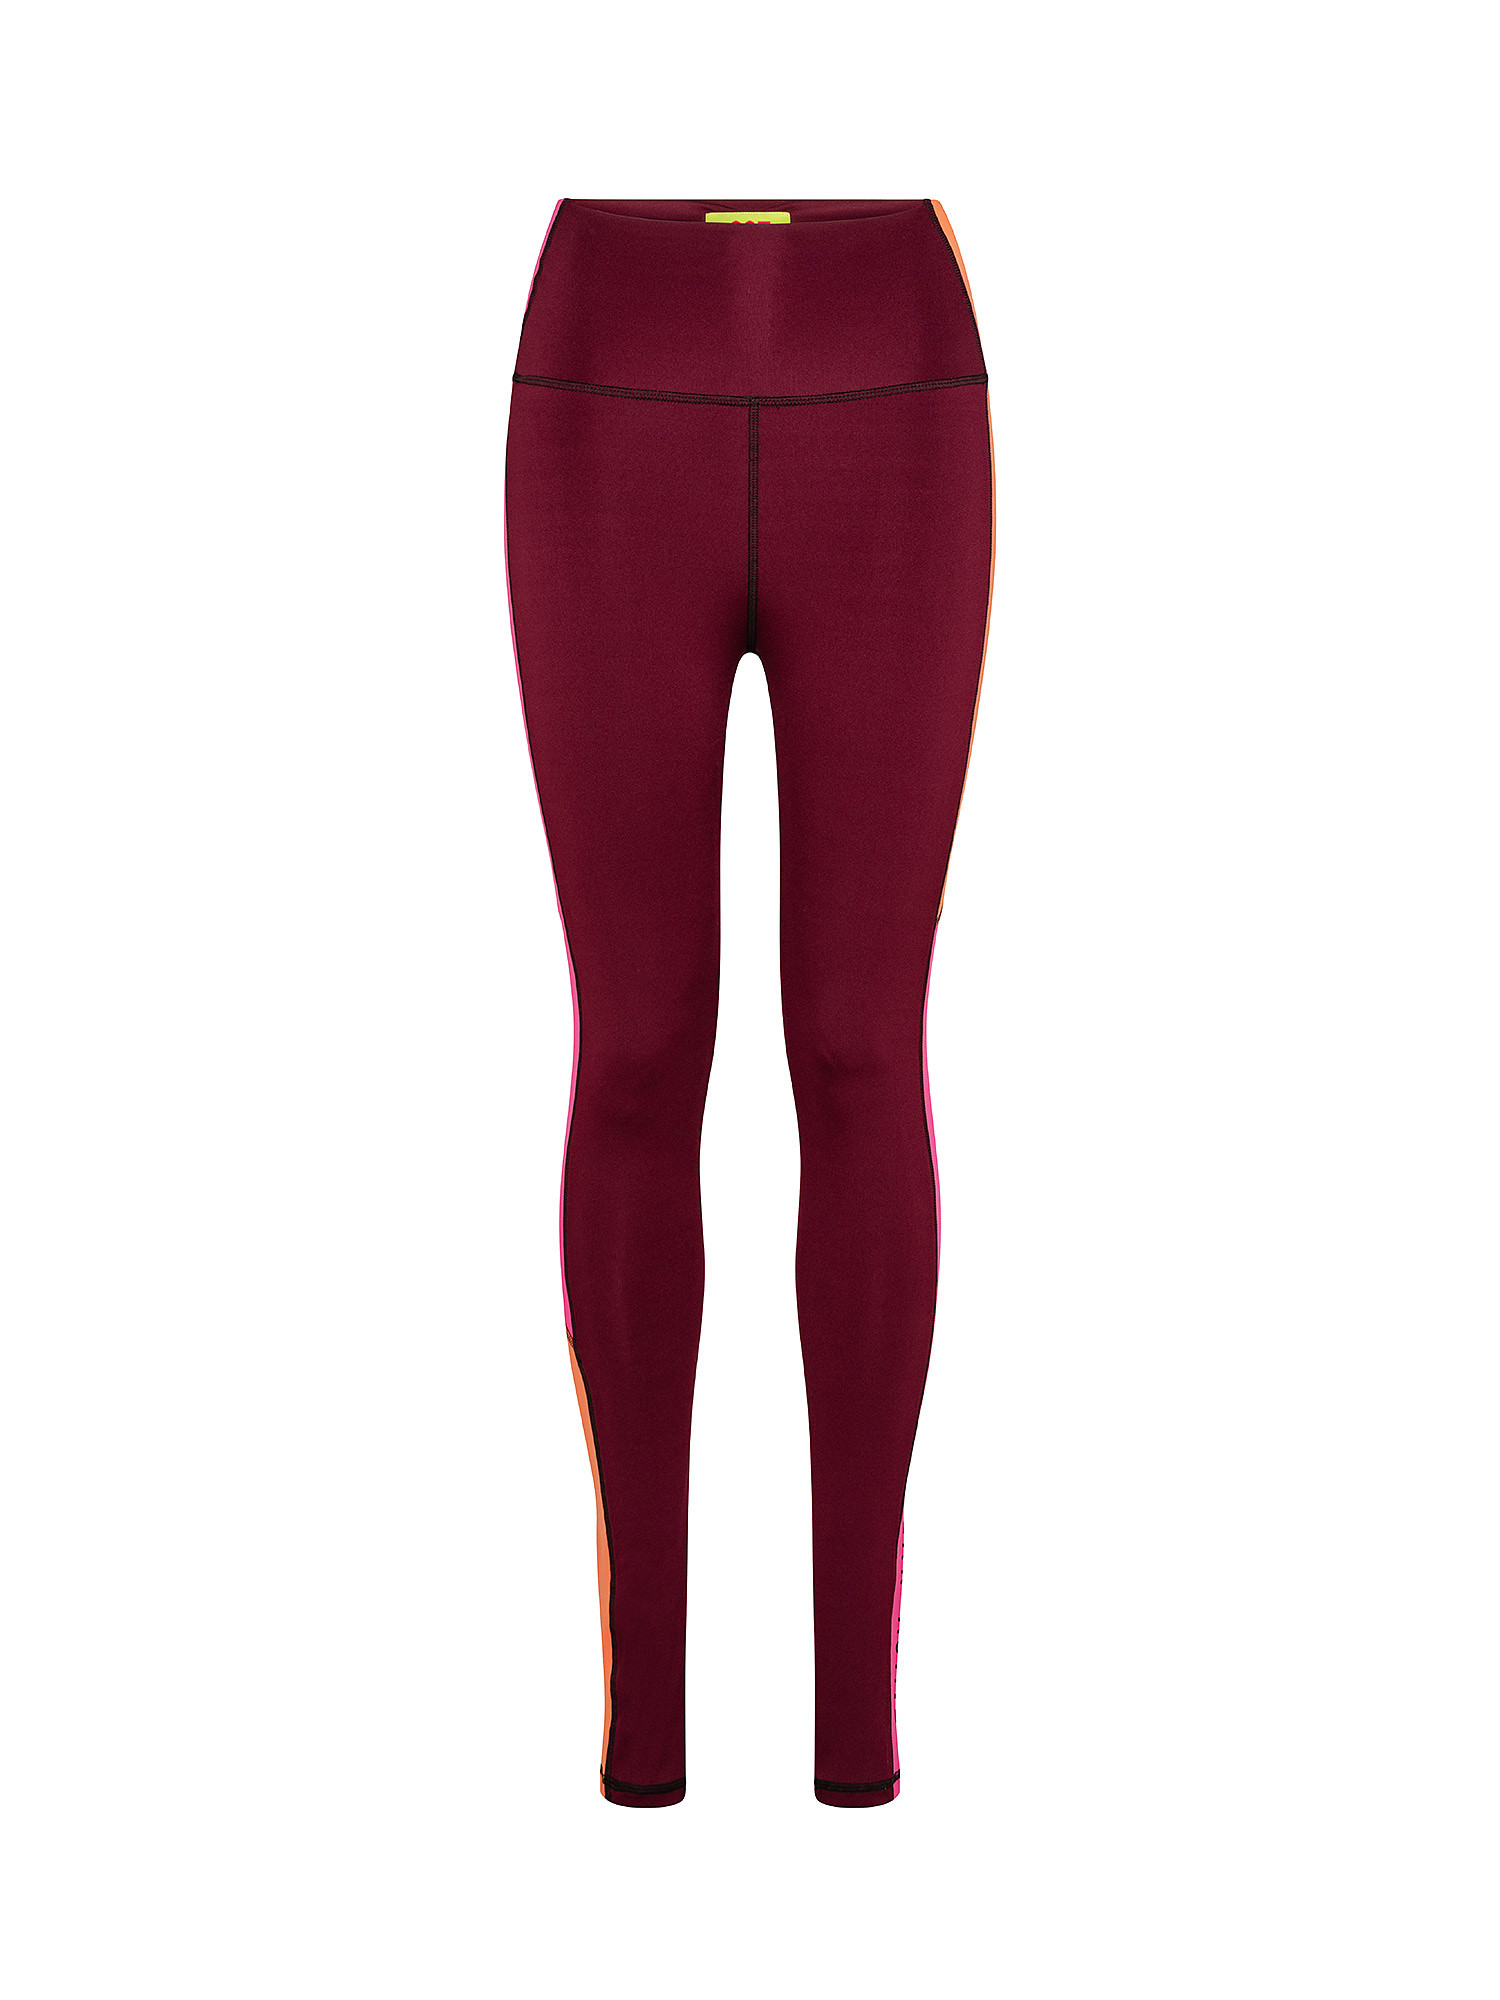 Trousers, Red Bordeaux, large image number 0